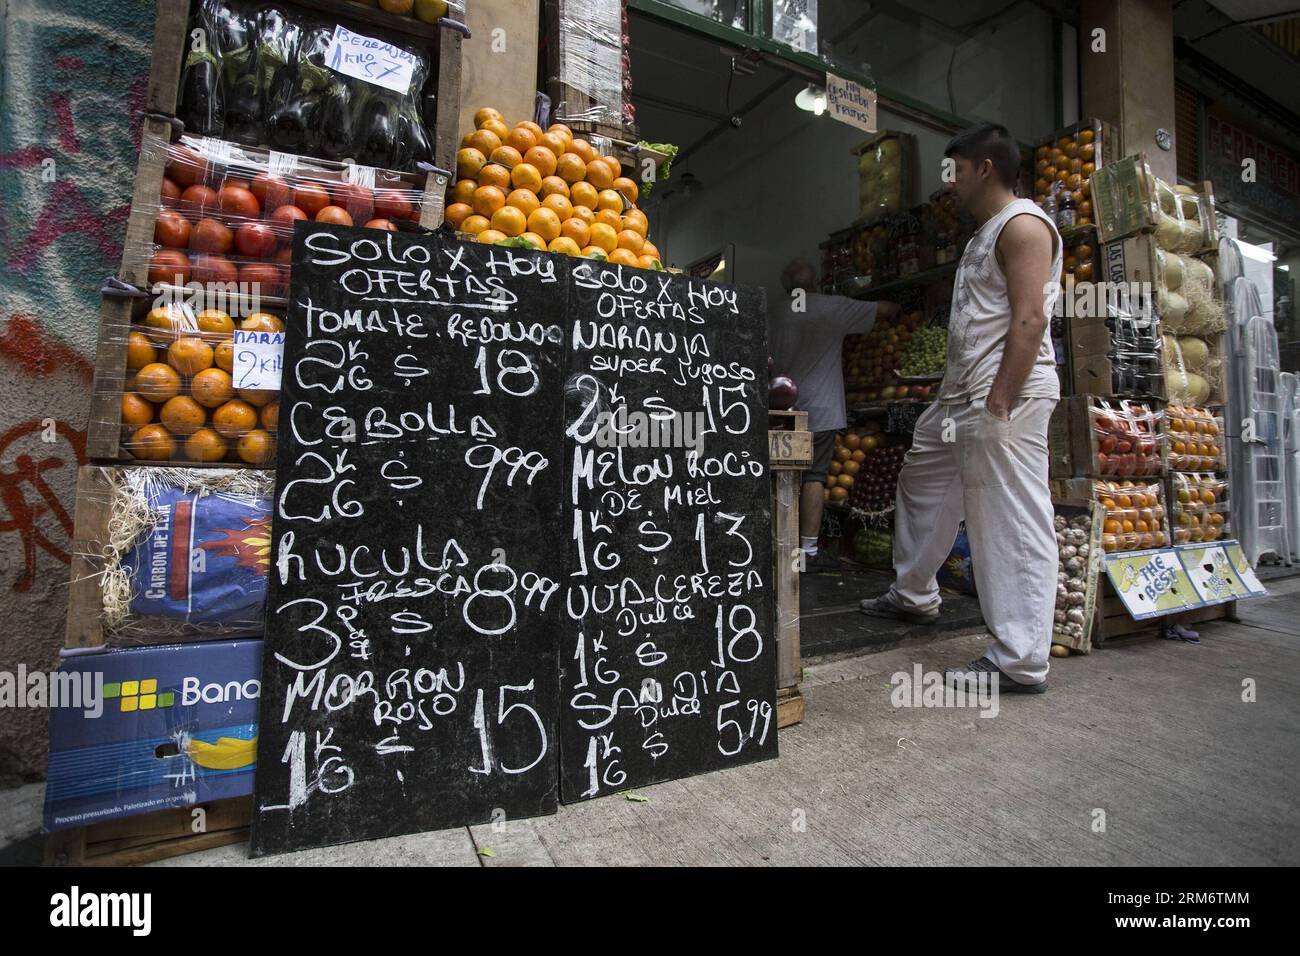 BUENOS AIRES, Jan. 29, 2014 - A man waits at a grocery store on the framework of the Cared Prices plan, implemented by the government to control inflation, in Buenos Aires City, capital of Argentina, on Jan. 29, 2014. Argentina s President Cristina Fernandez s goverment promoted a sharp devaluation of the Argentine peso. The Argentine peso fell 3.5 per cent against the U.S dollar at the official foreign exchange market, which represents the biggest devaluation of the local currency in a day since 2002, according to local press. (Xinhua/Martin Zabala) (ah) (ce) ARGENTINA-BUENOS AIRES-ECONOMY-DE Stock Photo